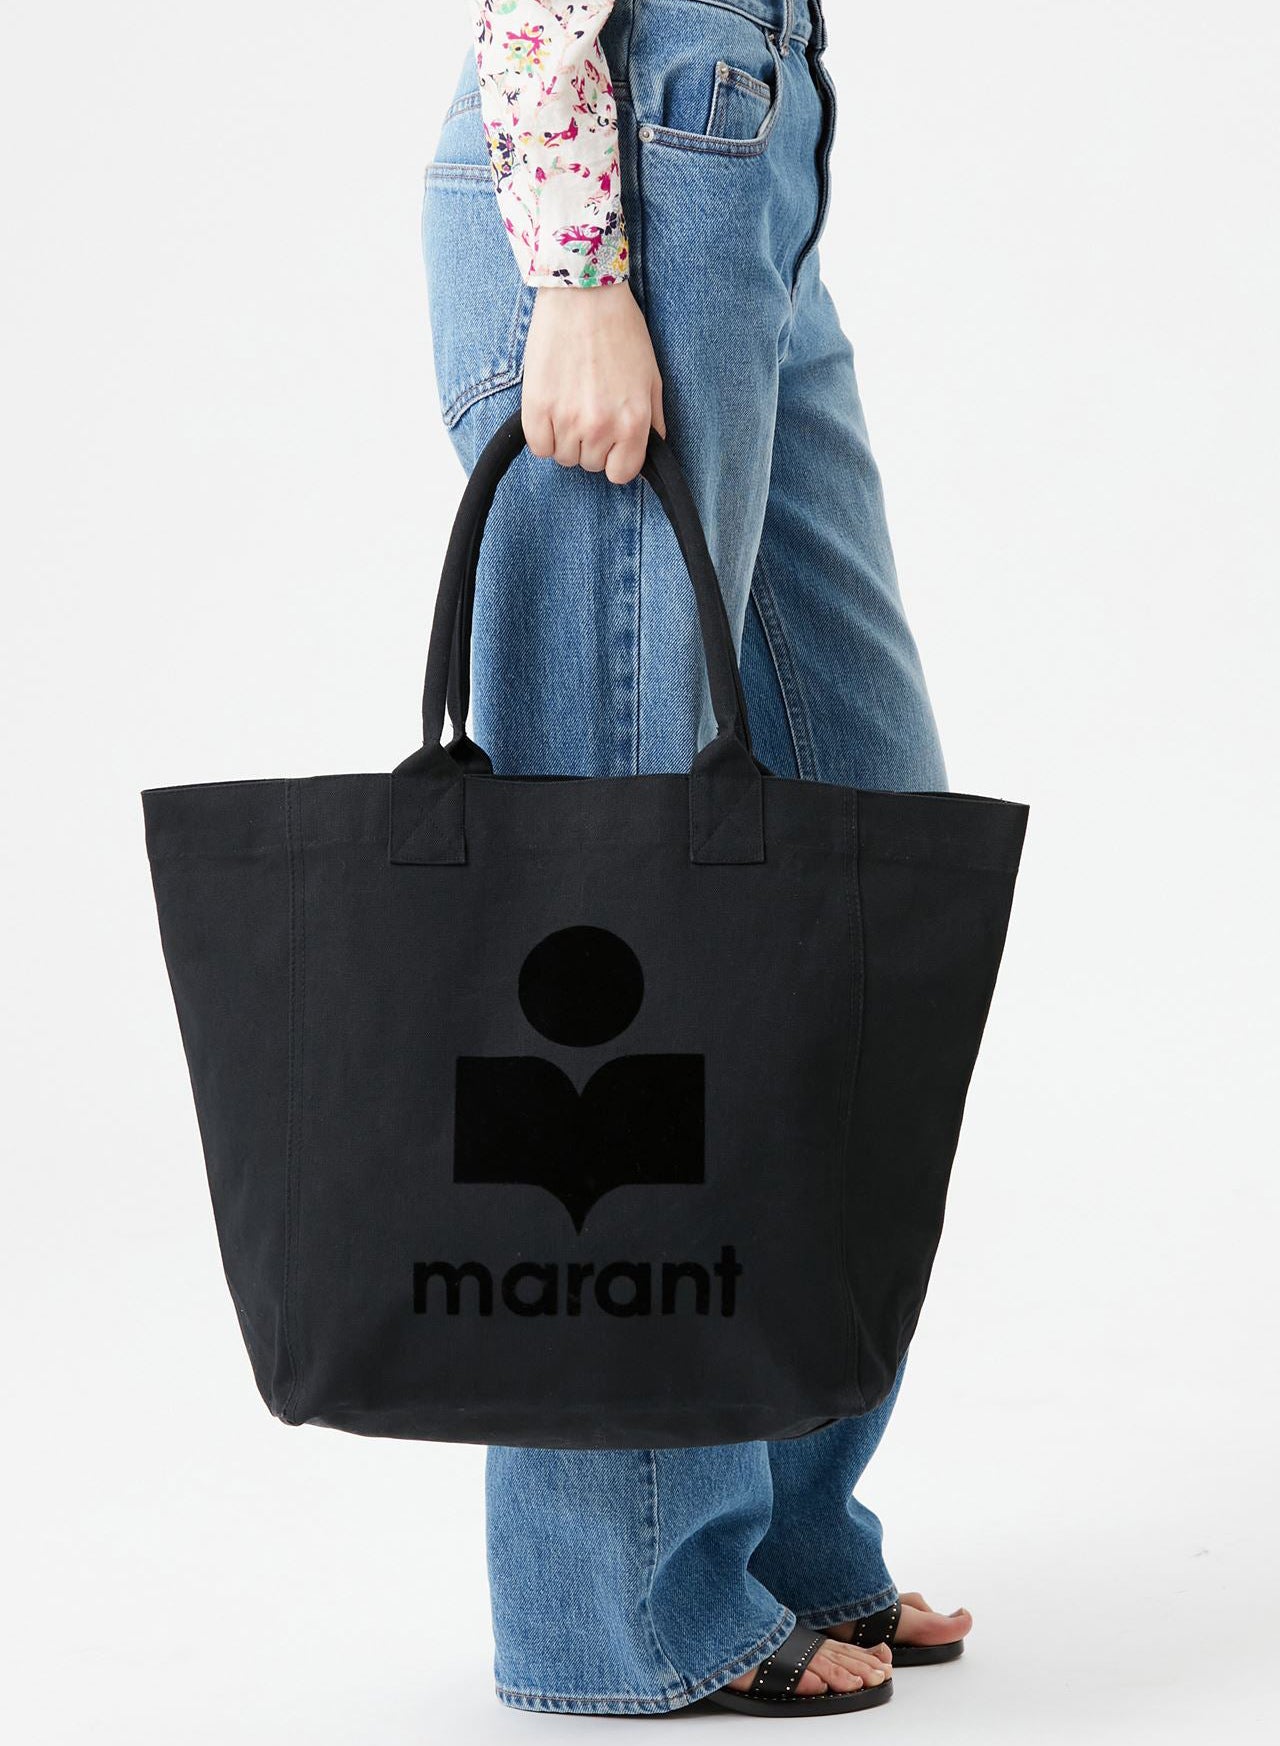 Isabel Marant - Shoes Bags Accessories